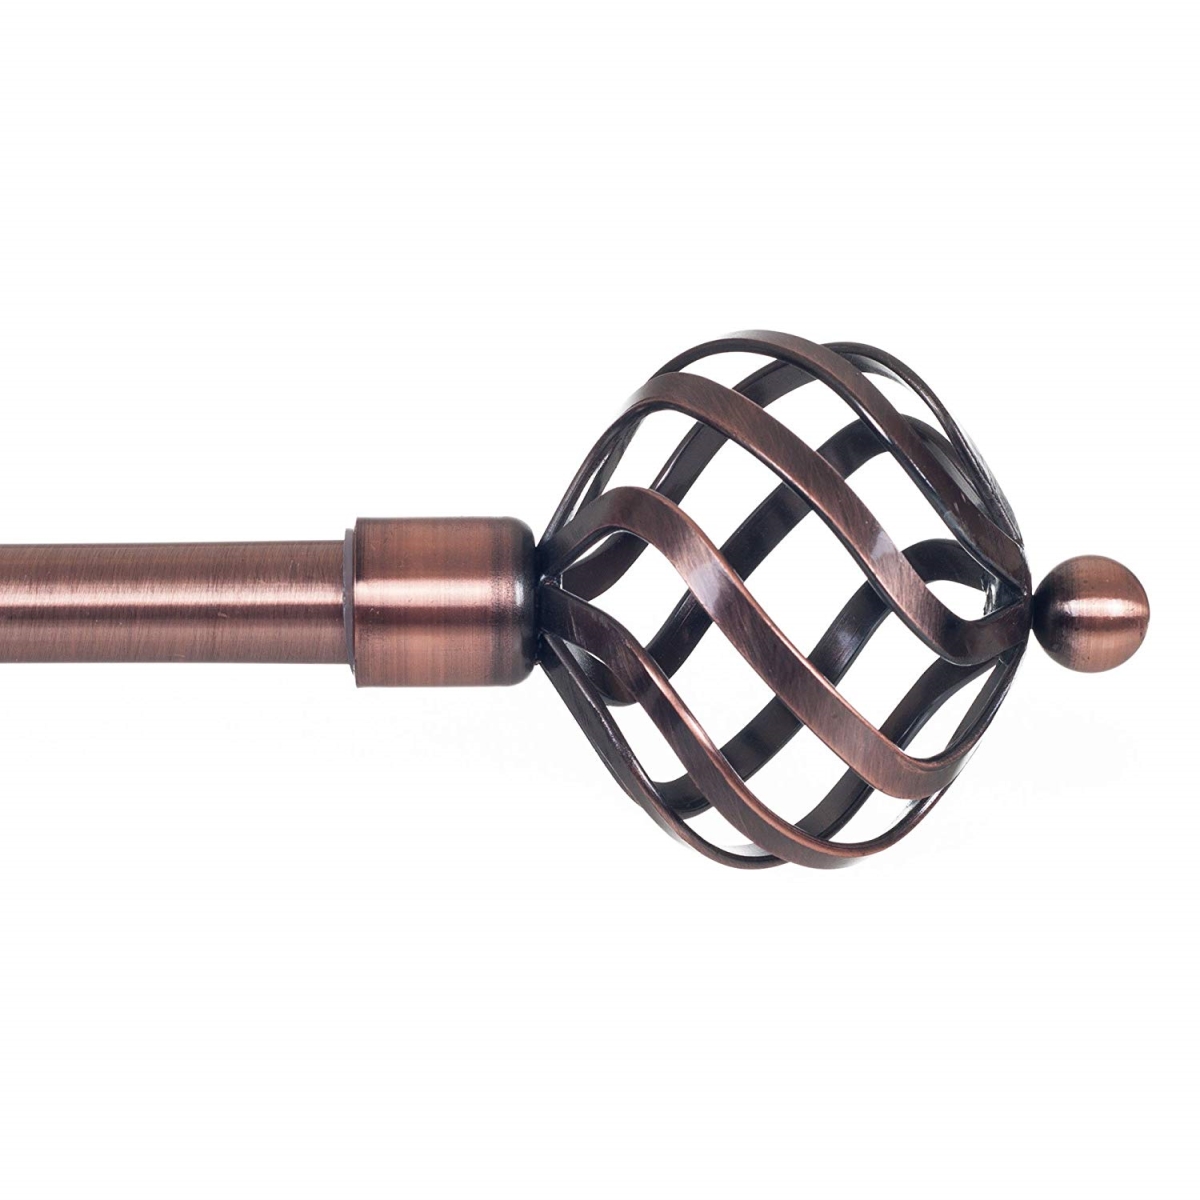 63a-19370 Twisted Sphere Curtain Rod For Window, Copper - 0.75 In.